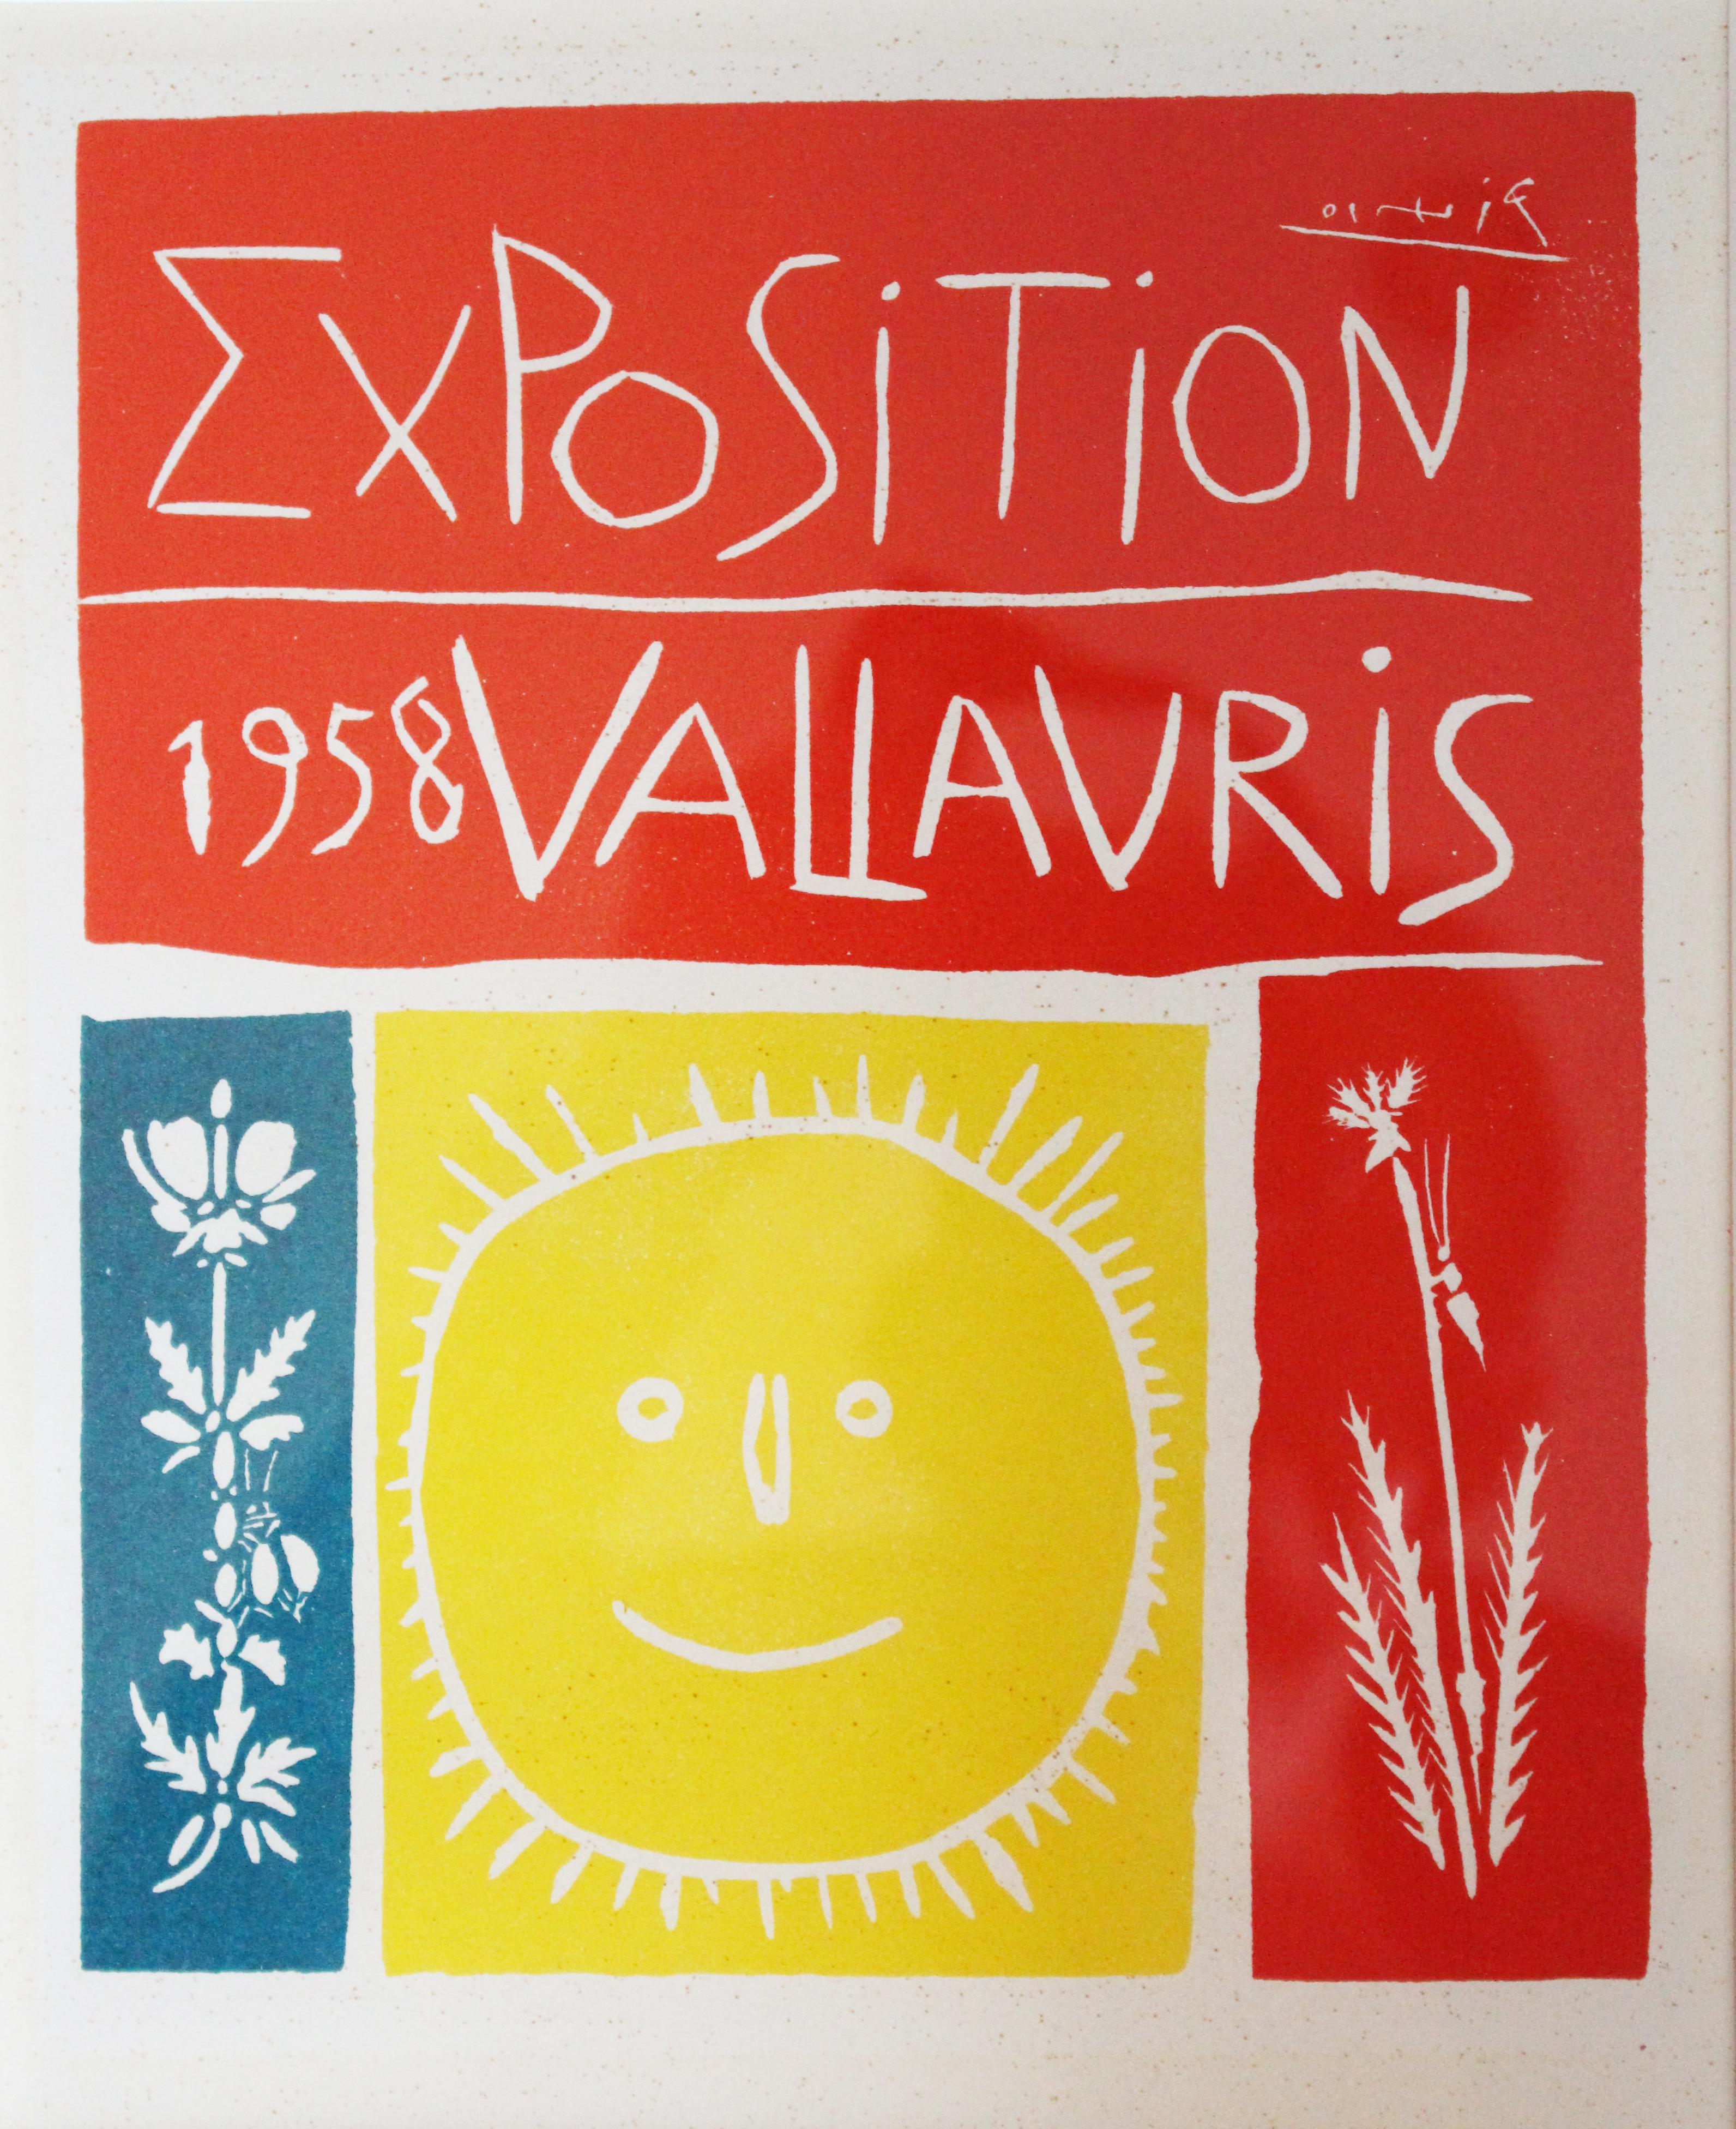 Pablo Picasso (1881 - 1973), Exposition Vallauris Mini Poster (Poster for the Exhibition), 1958. Described as one of Picasso’s most beautiful posters due to its “gay and harmonious colours and its balanced compositions”. Signed in plate. Framed Size